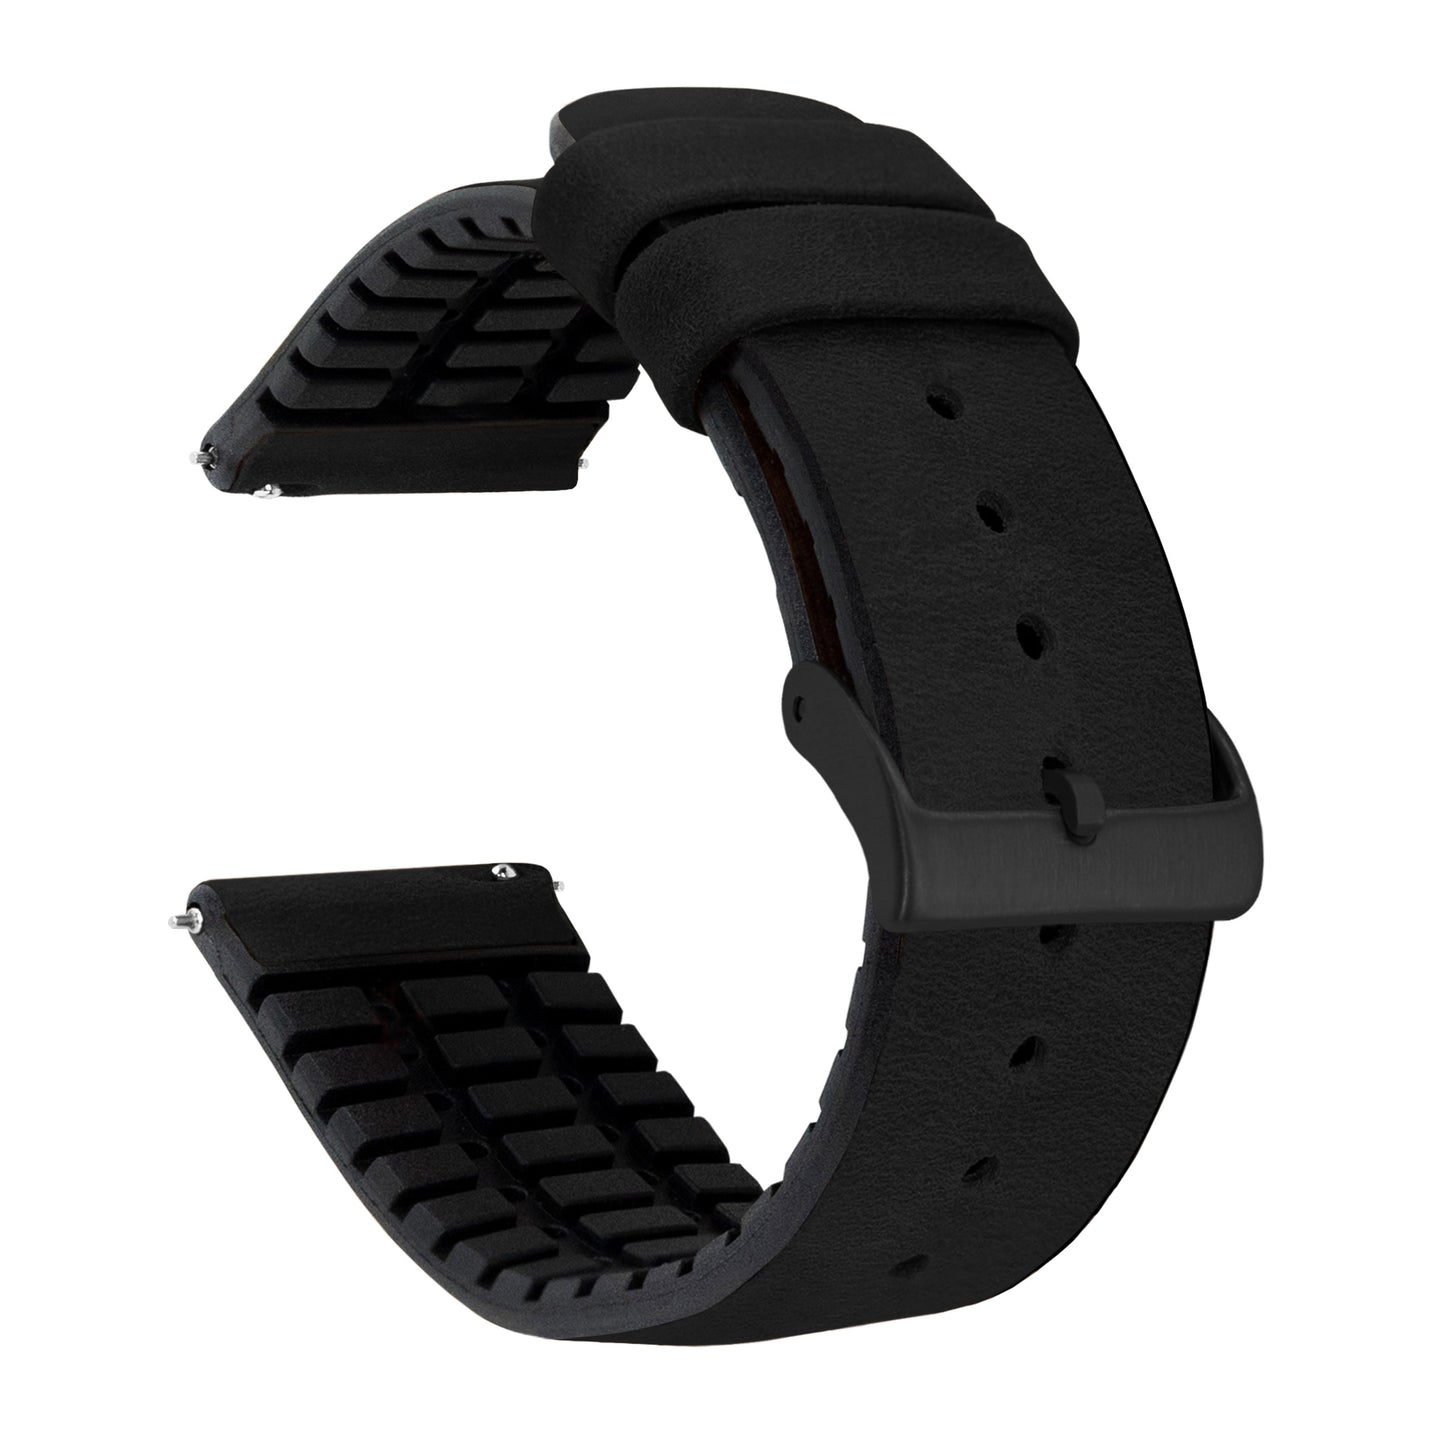 Black Leather and Rubber Hybrid - Barton Watch Bands